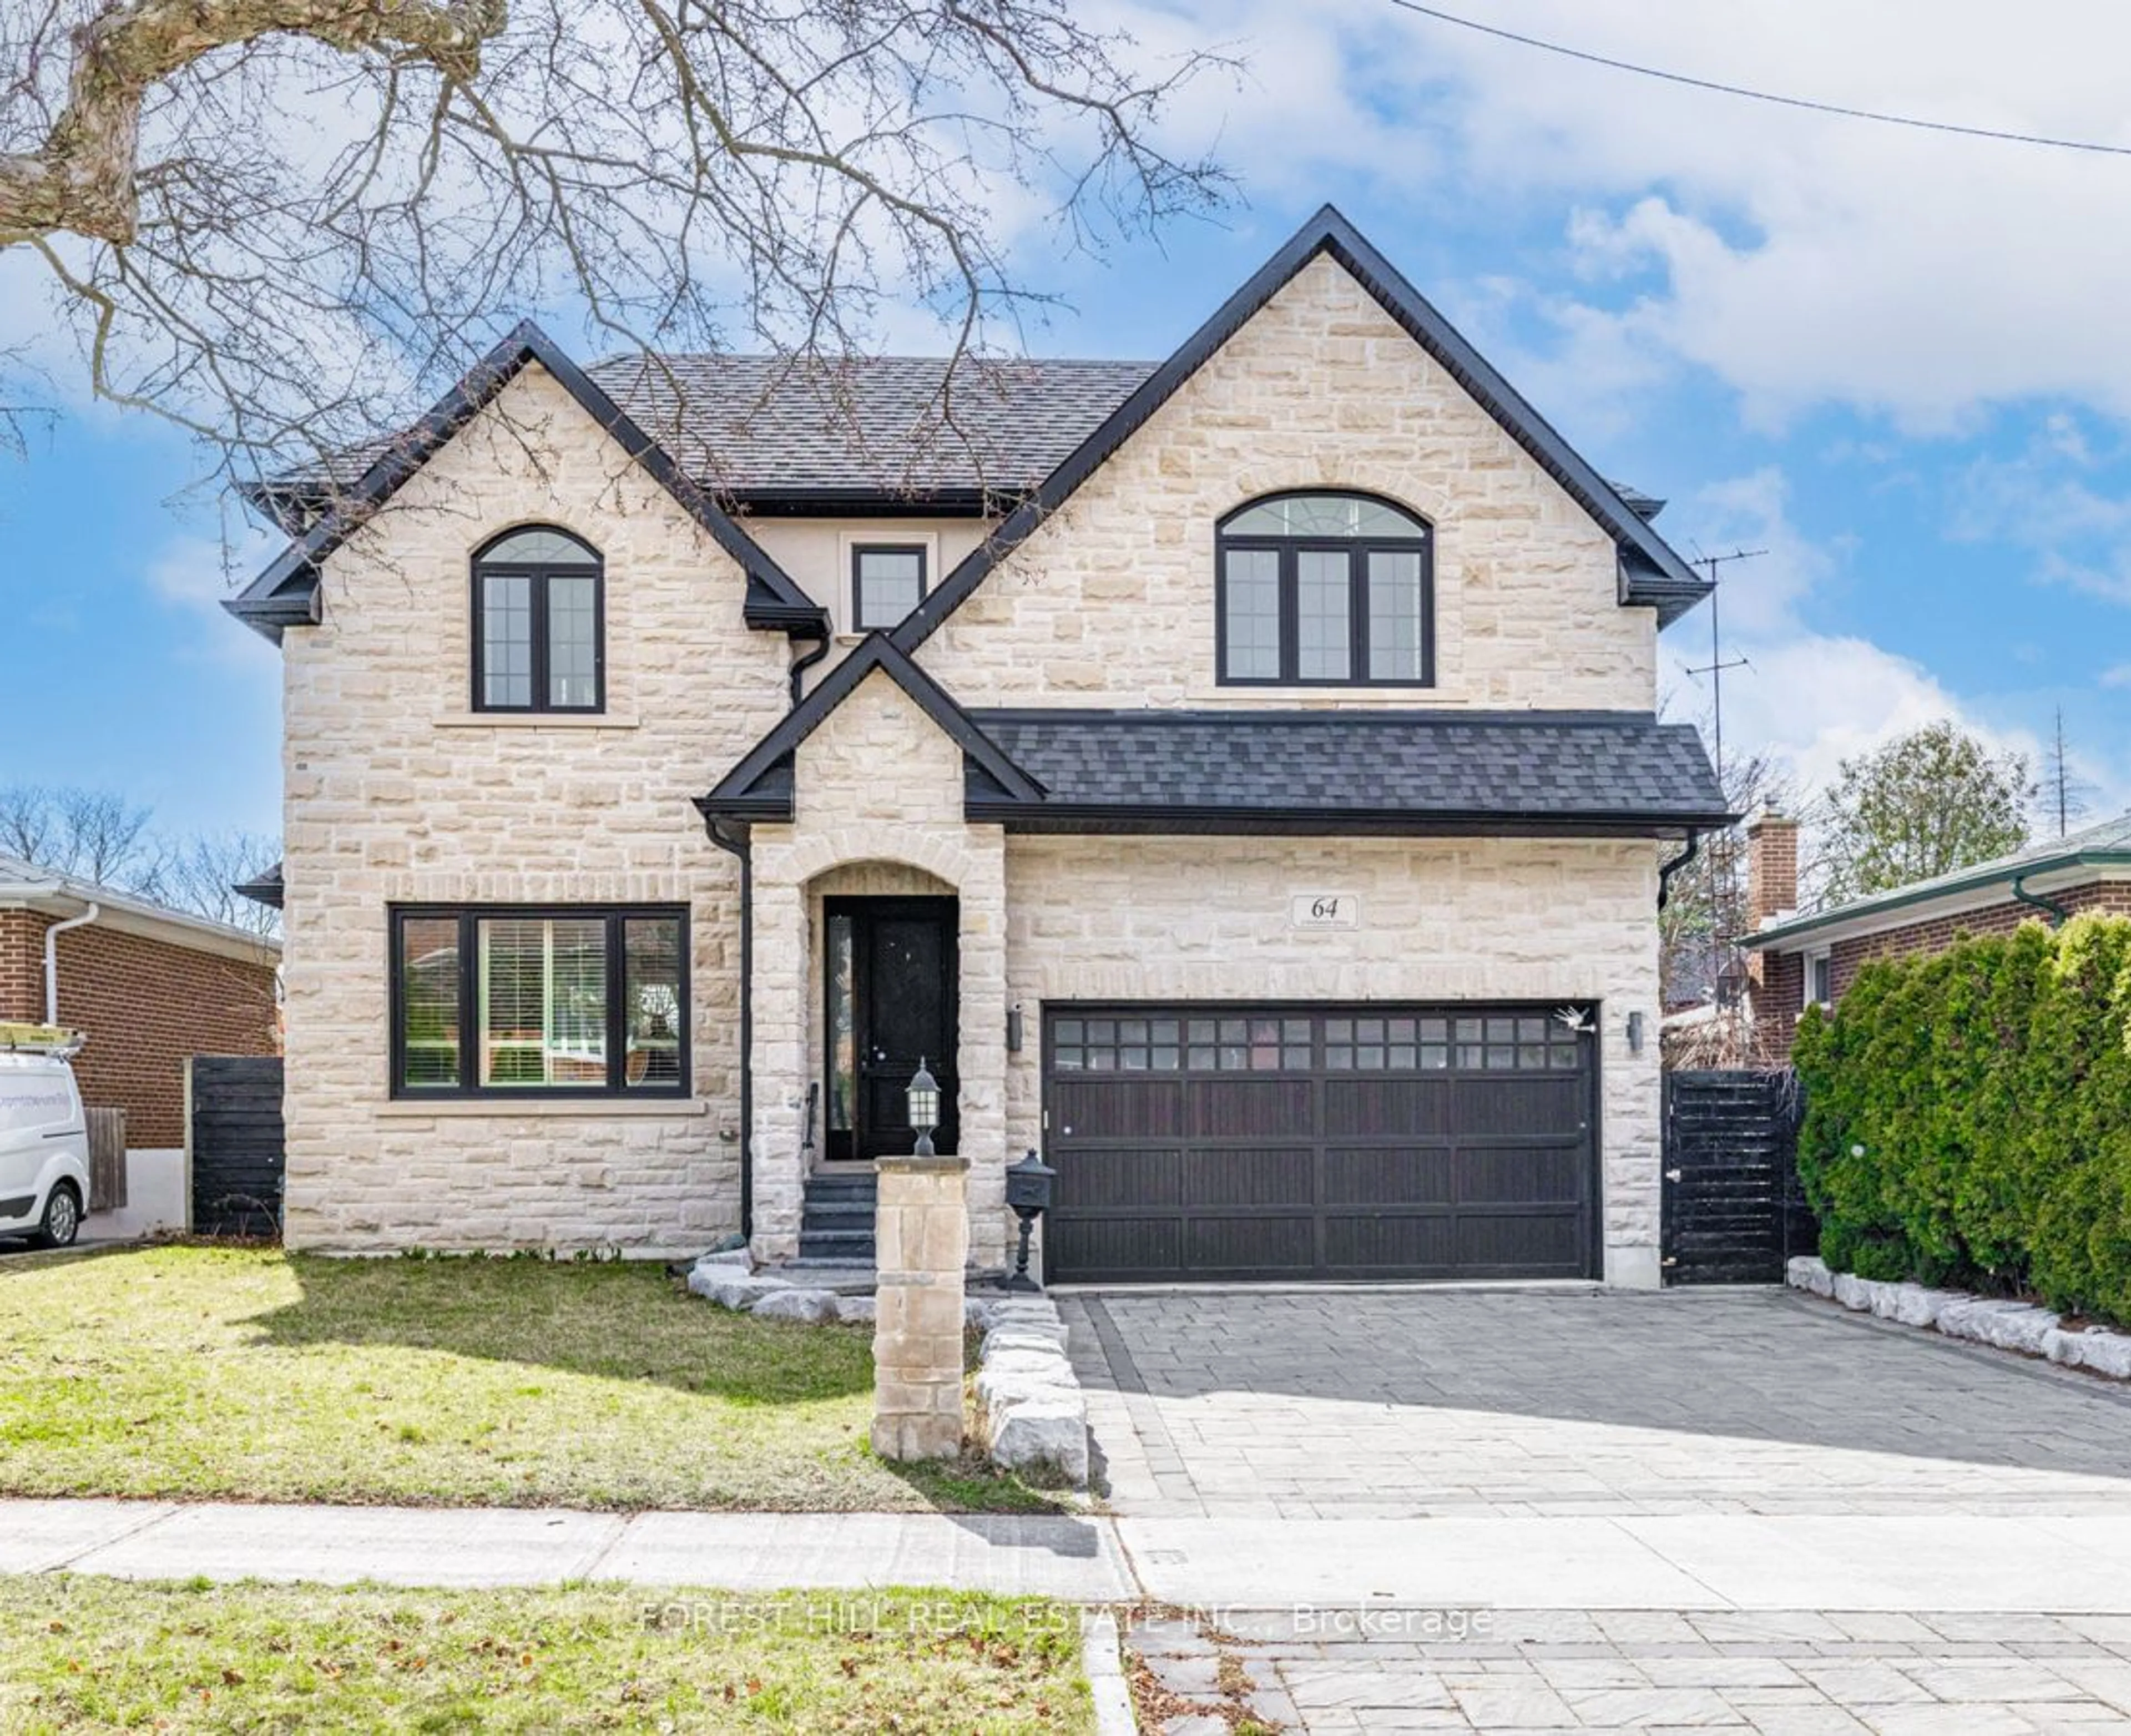 Home with brick exterior material for 64 Cresthaven Dr, Toronto Ontario M2H 1M3